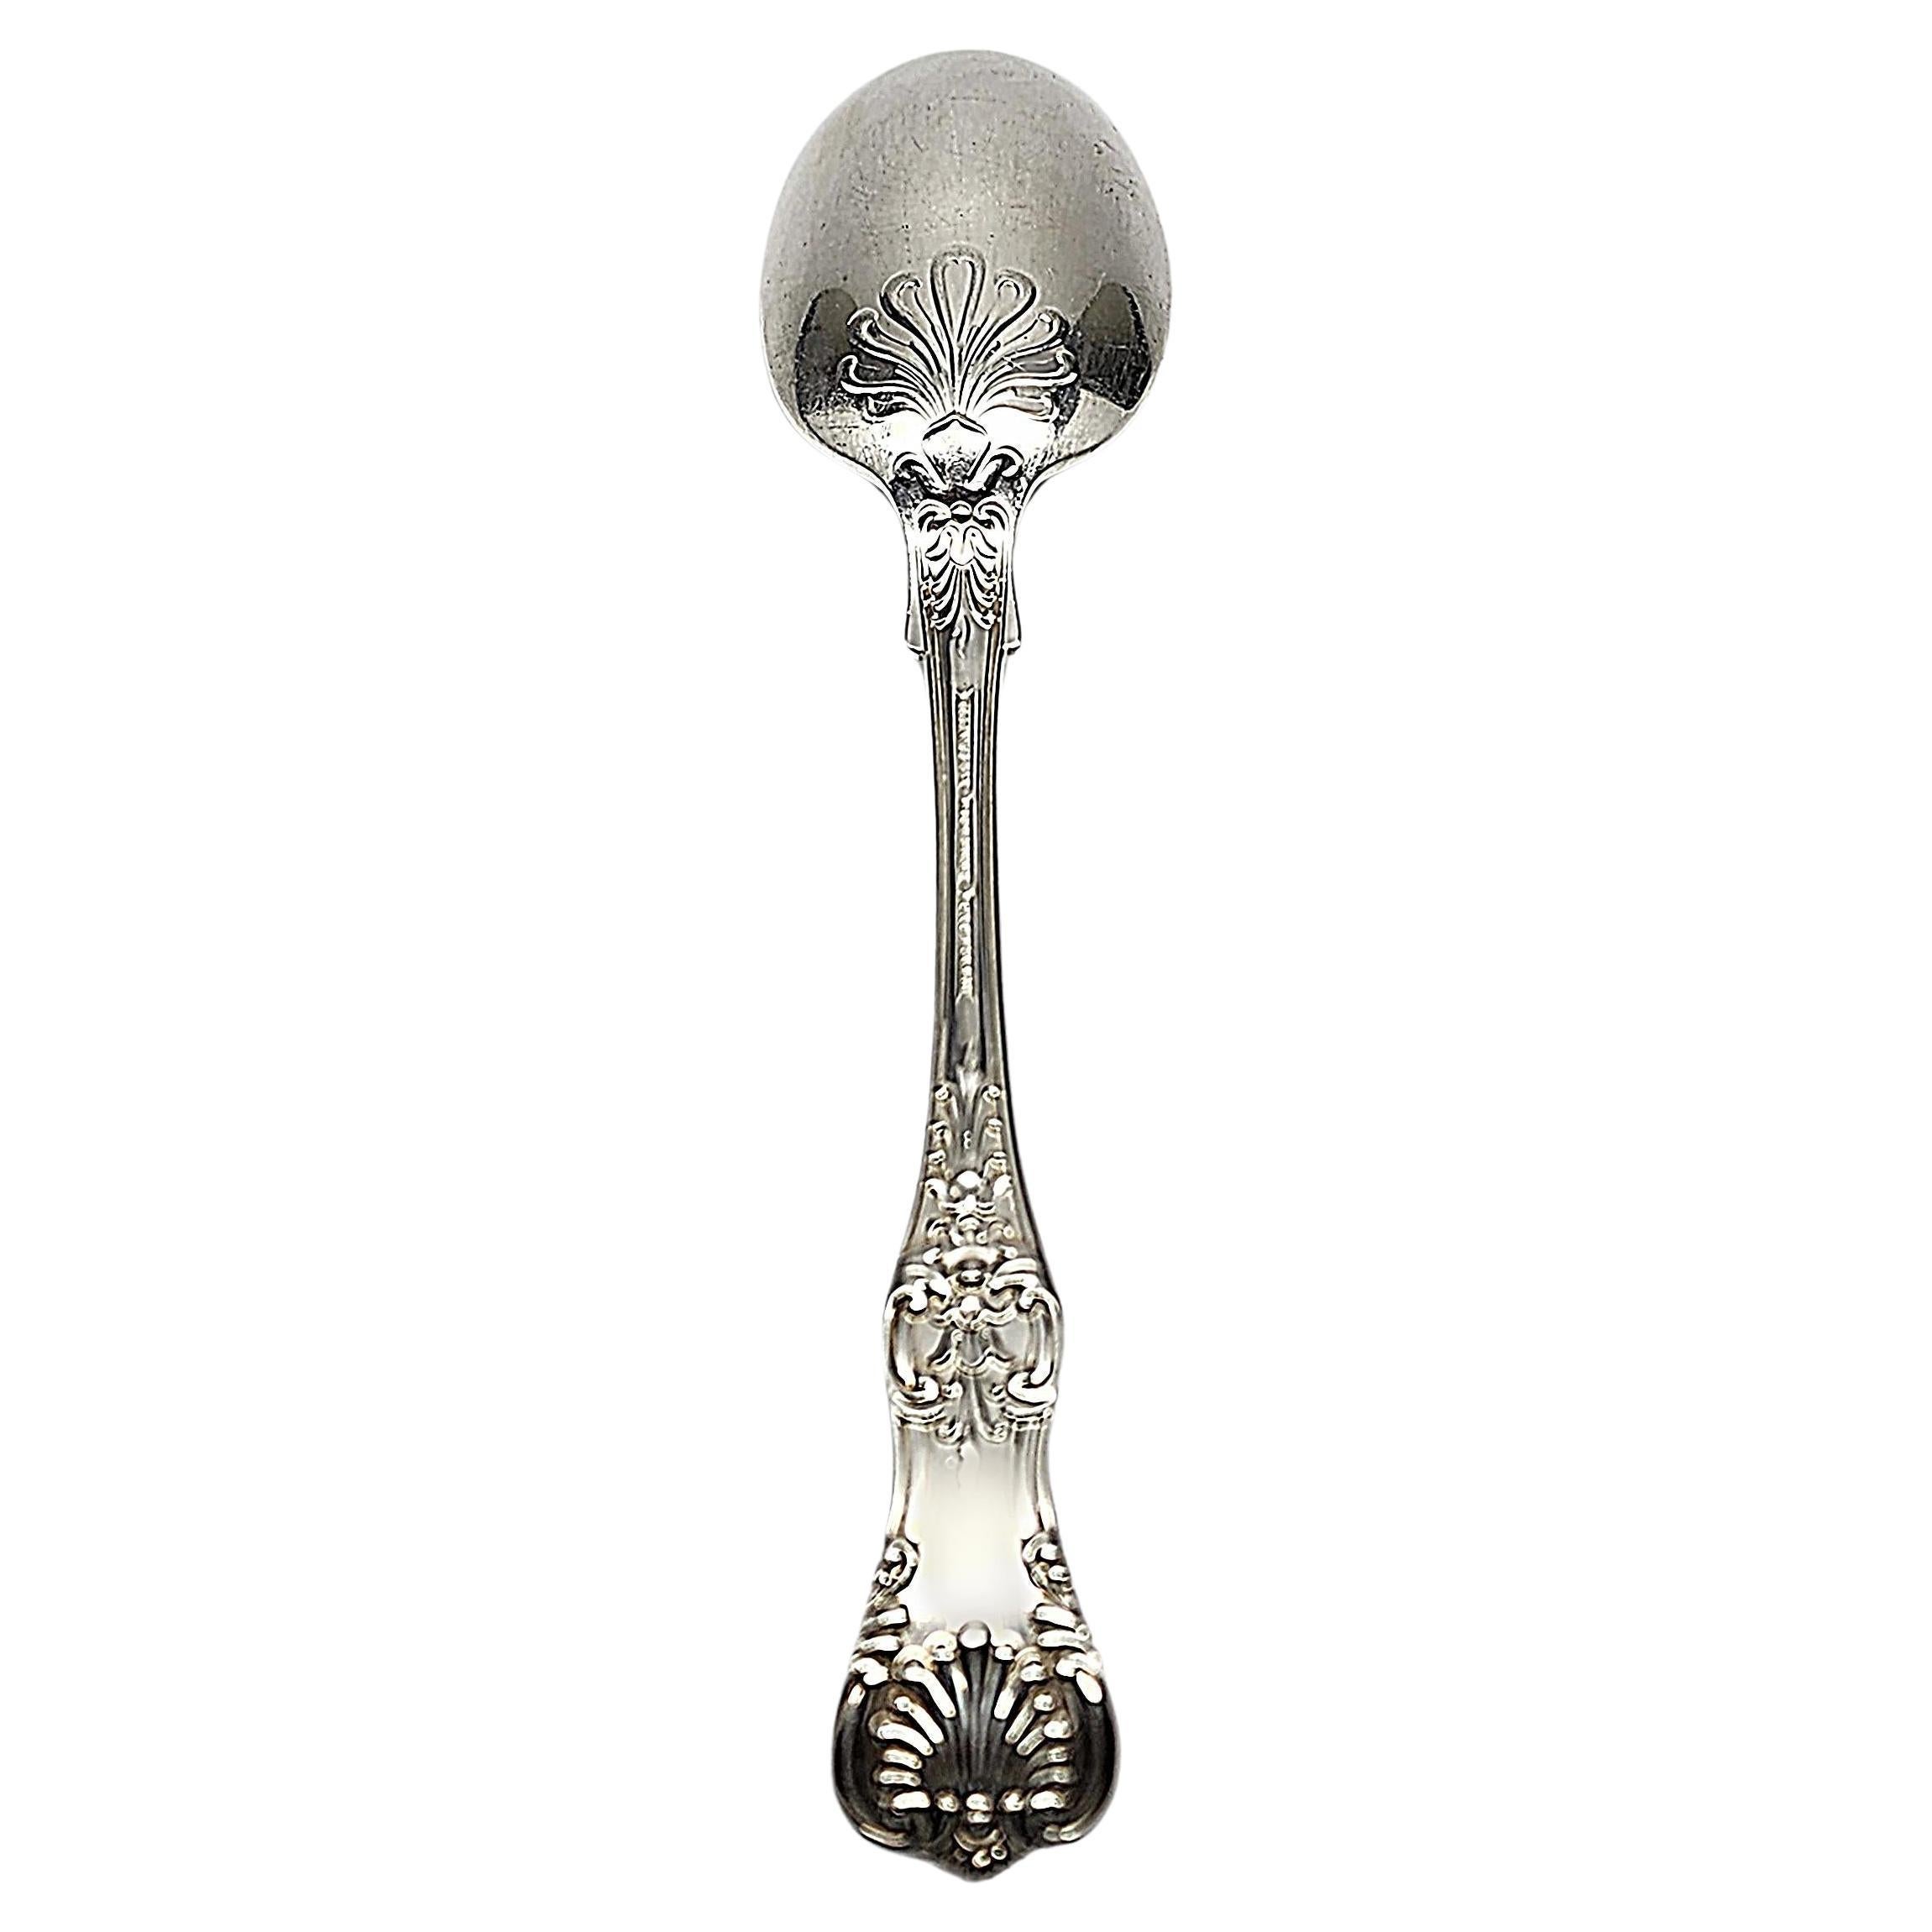 Sterling silver serving tablespoon by Tiffany & Co in the English King pattern.

No monogram.

Beautiful large spoon in Tiffany's intricate and decorative version of a King pattern, which were very popular in the late 19th century. The M mark dates